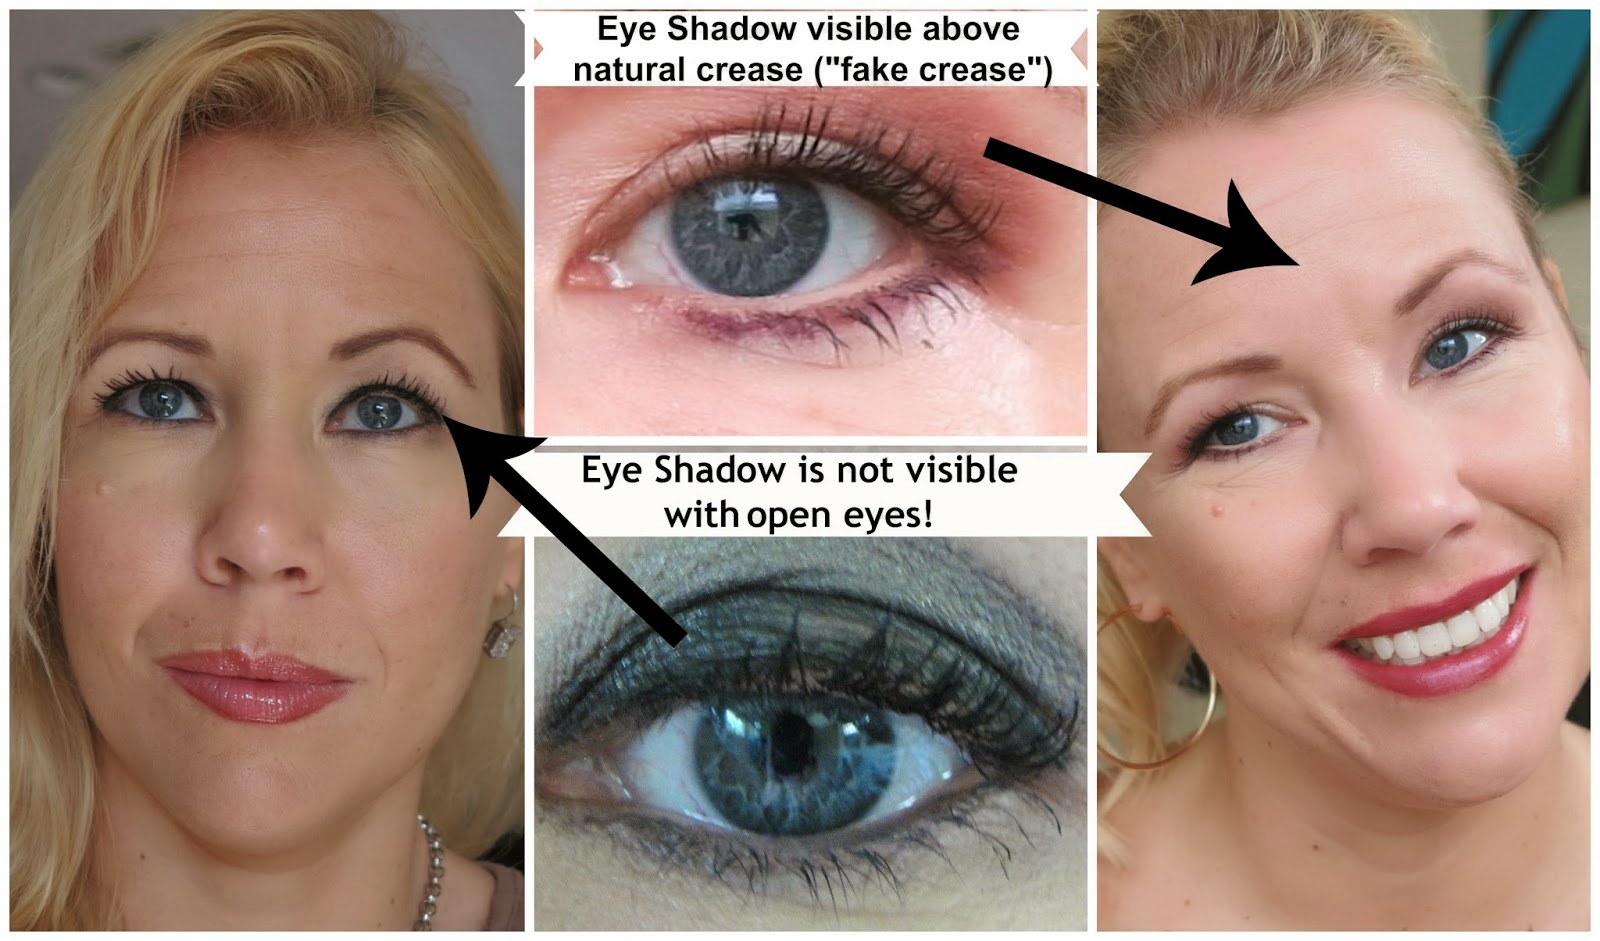 8 TIPS HOW TO APPLY EYESHADOW ON HOODED EYES